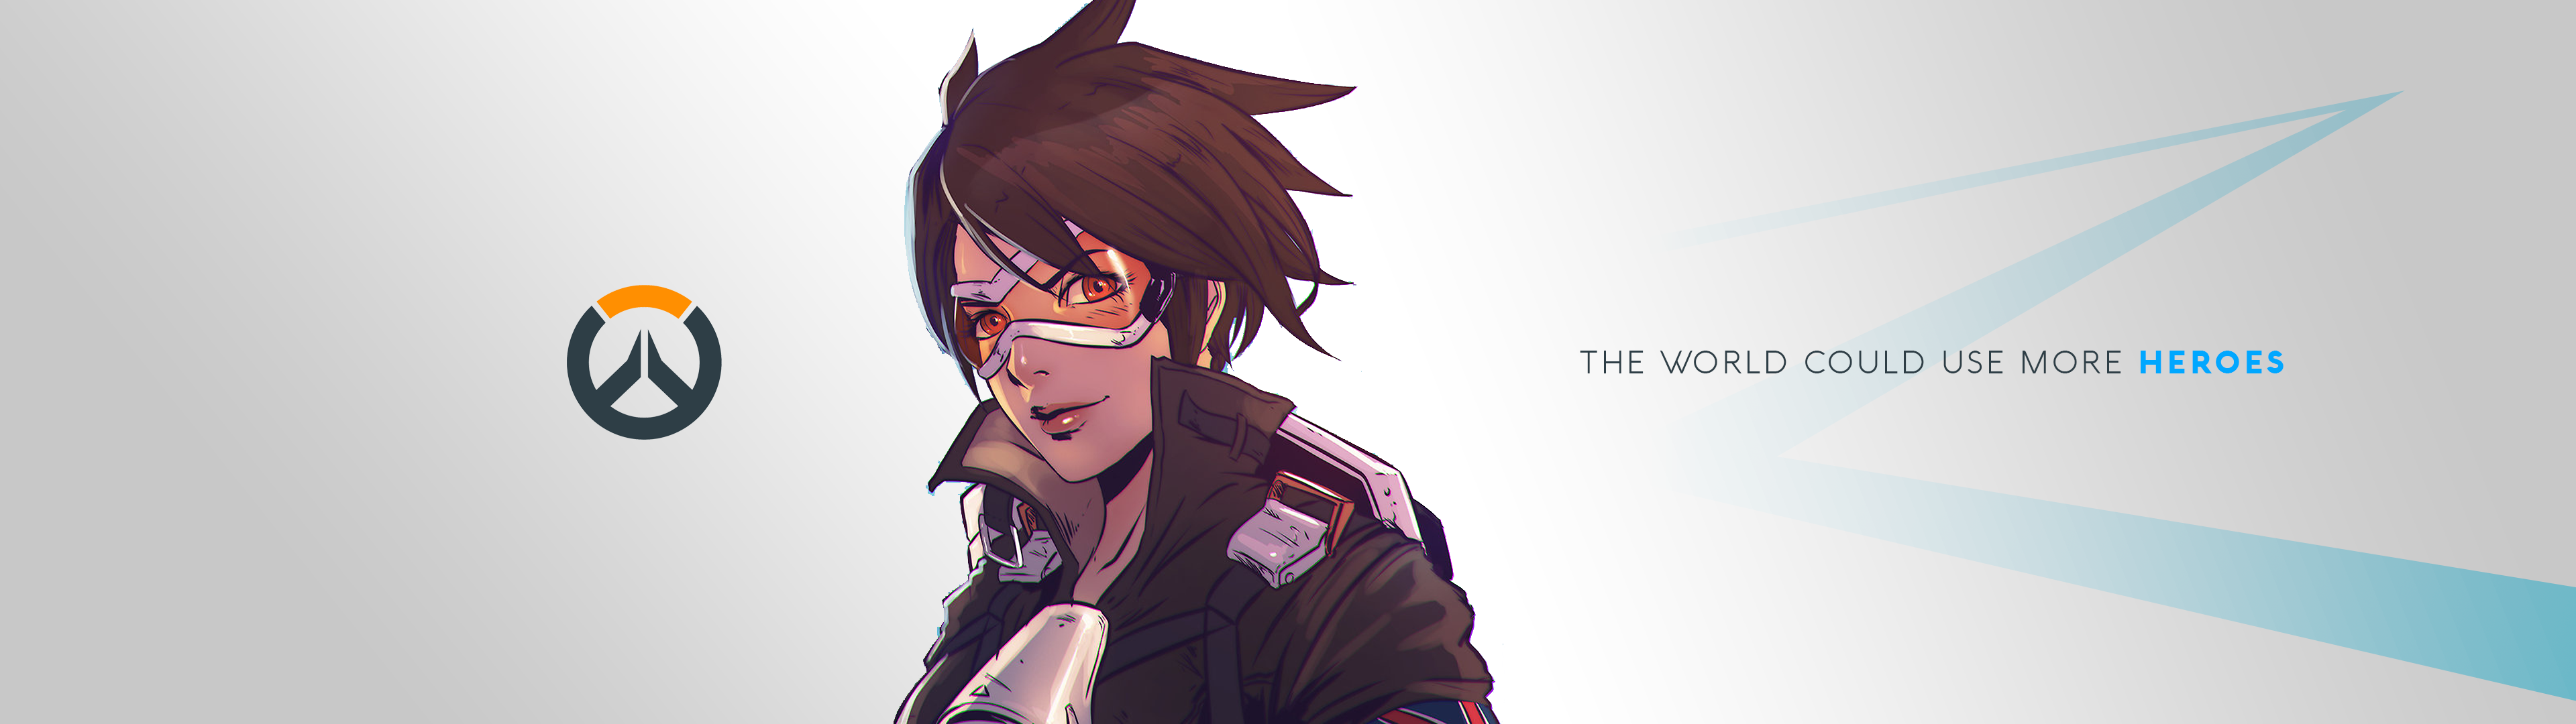 Video Game   Overwatch Tracer Wallpaper